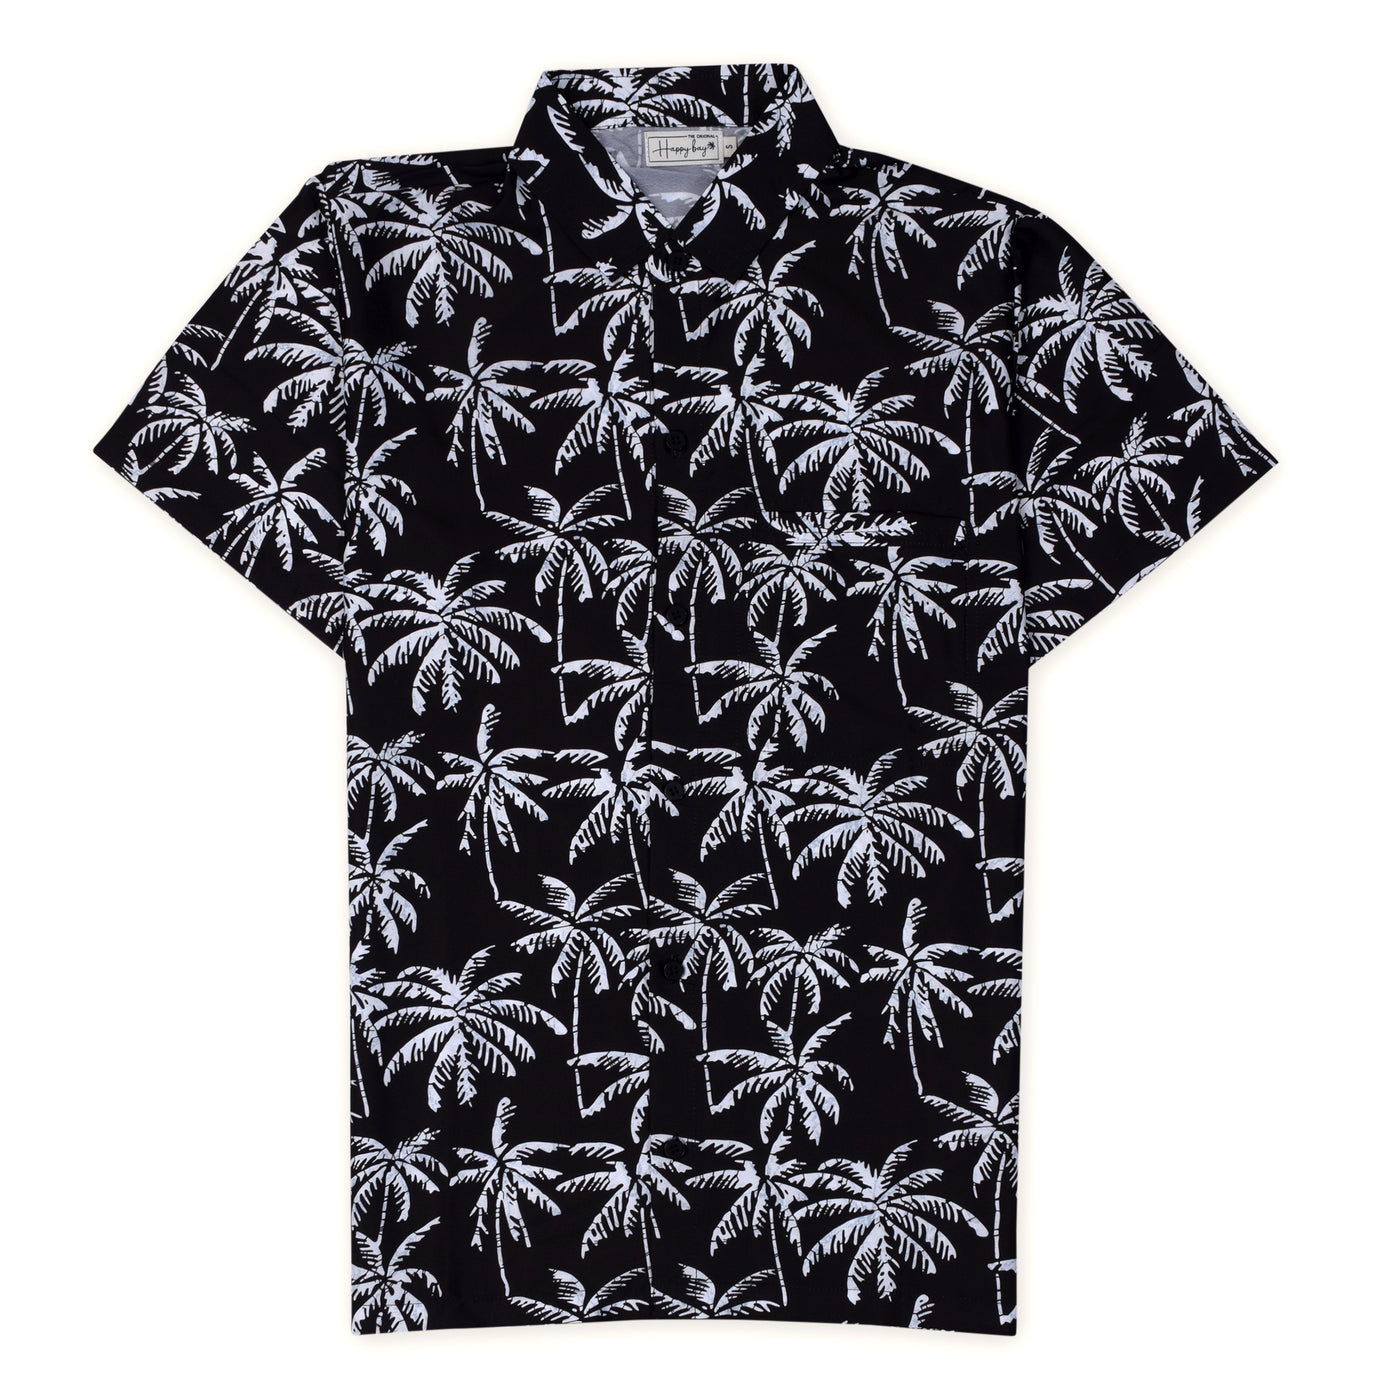 Buy now palmeras repeat party shirt